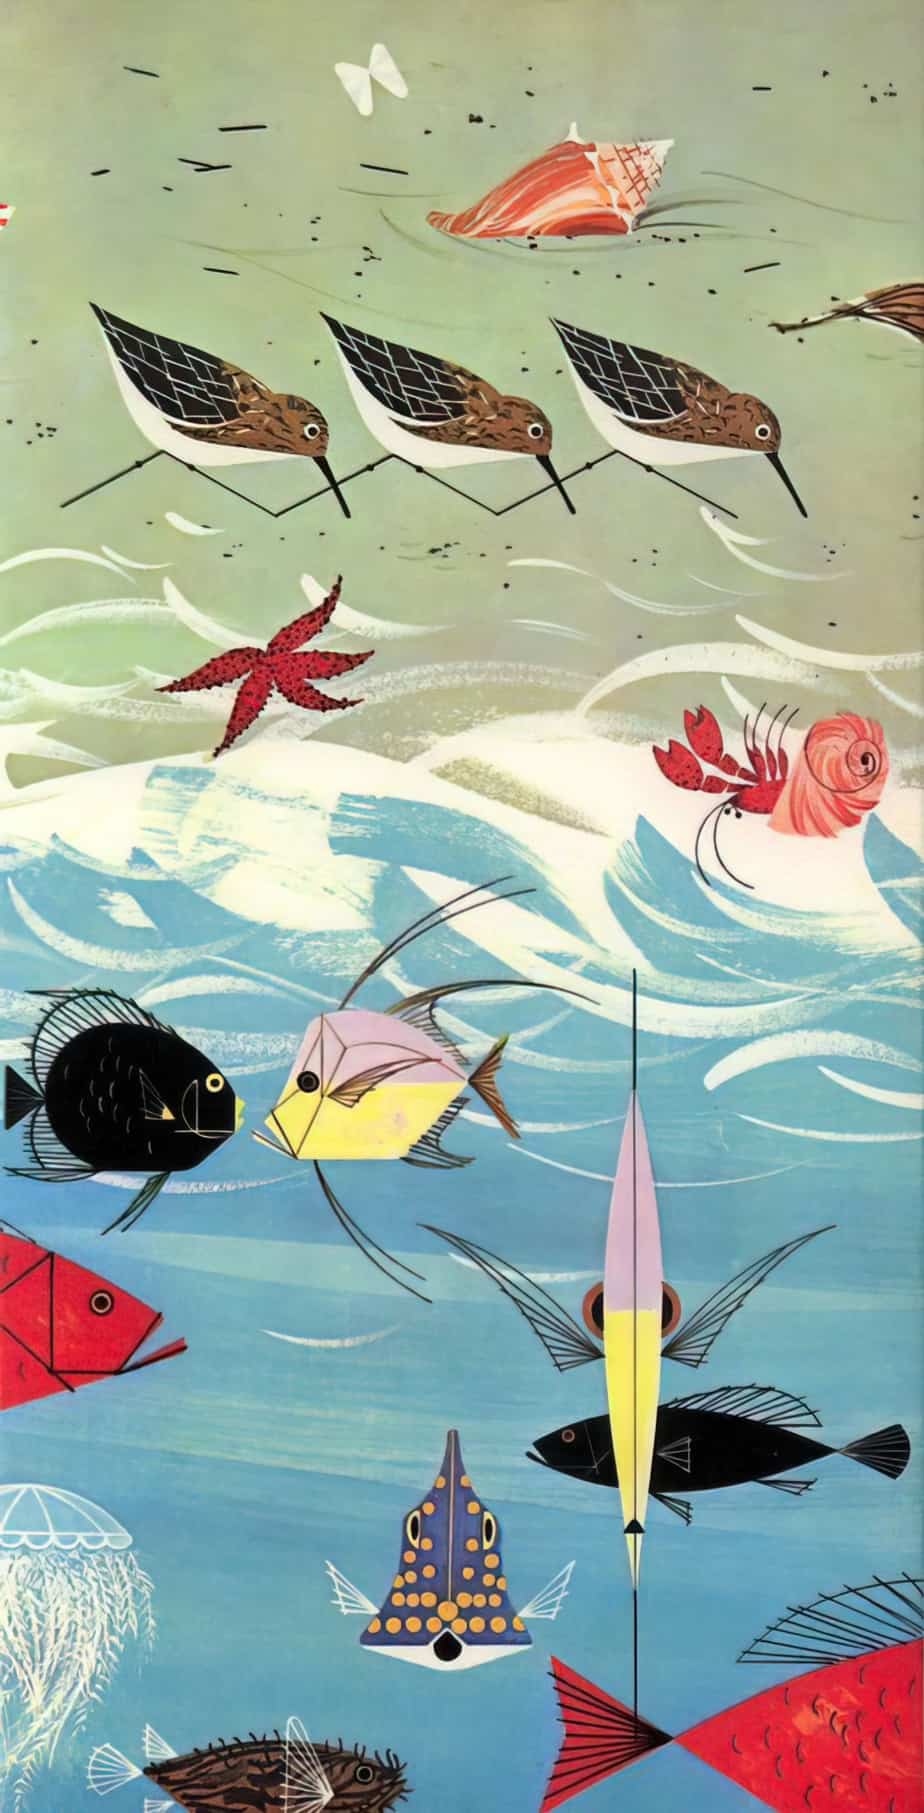 Charley Harper, illustration from The Golden Book of Biology, 1961 fish